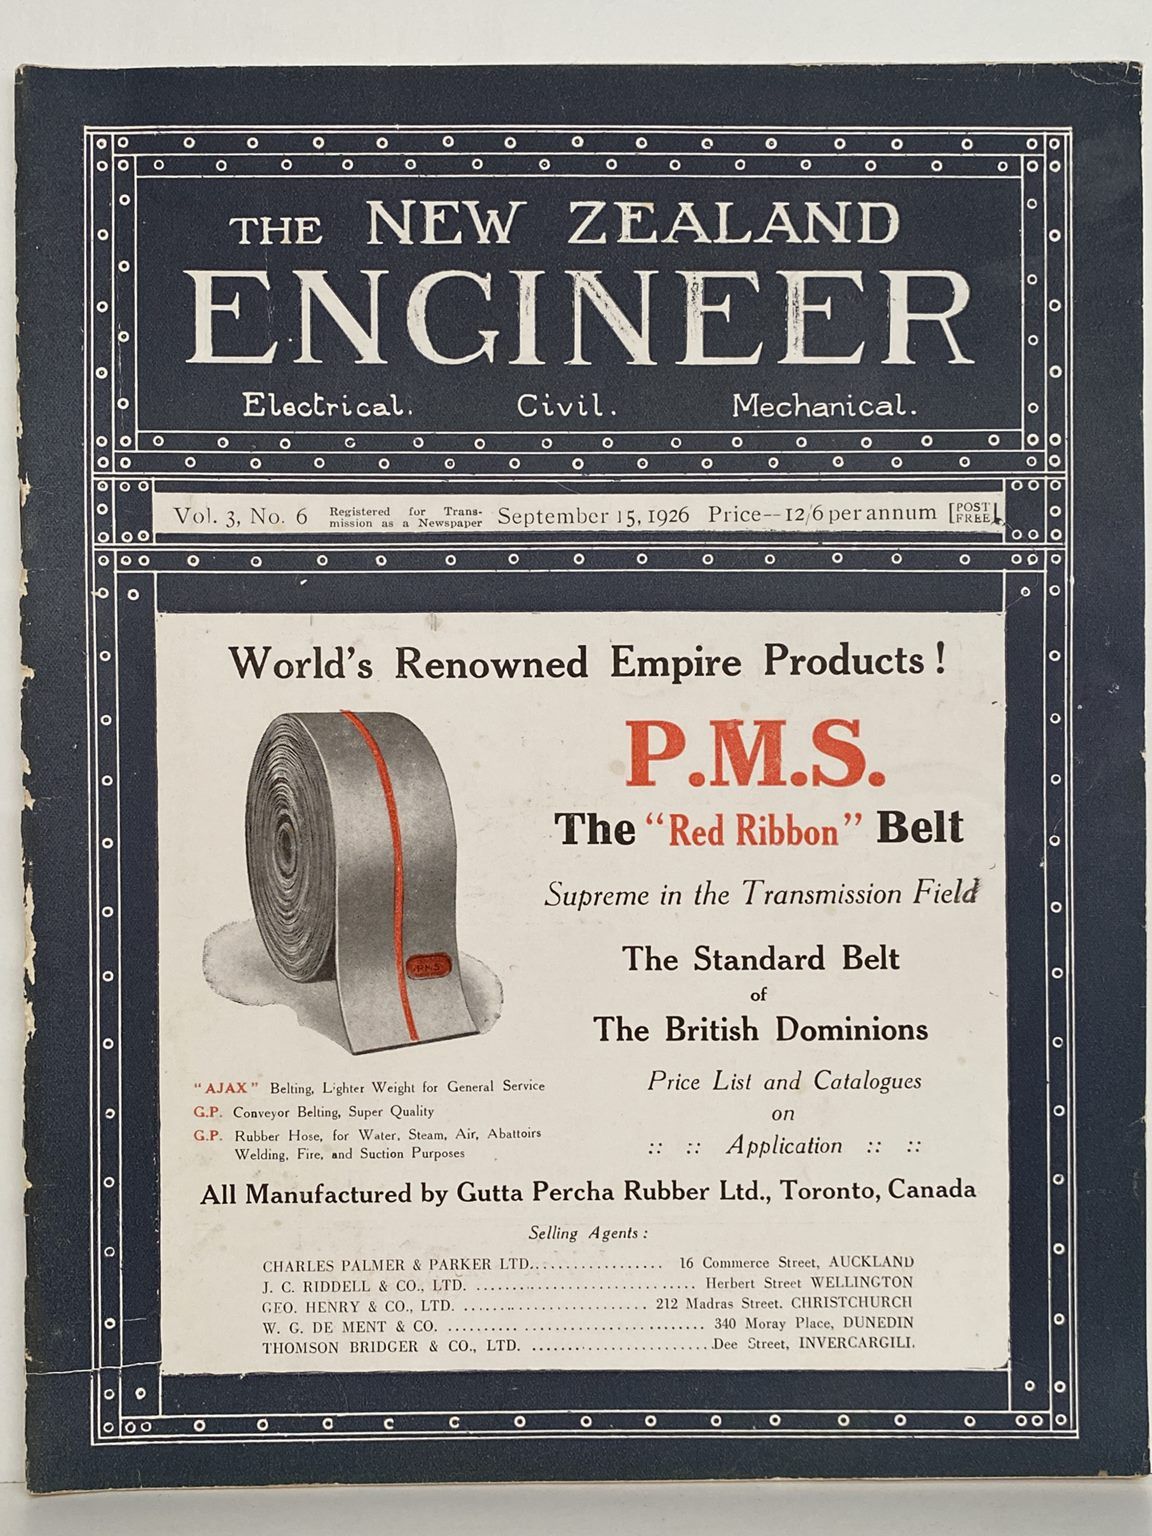 OLD MAGAZINE: The New Zealand Engineer Vol. 3, No. 6 - 15 September 1926